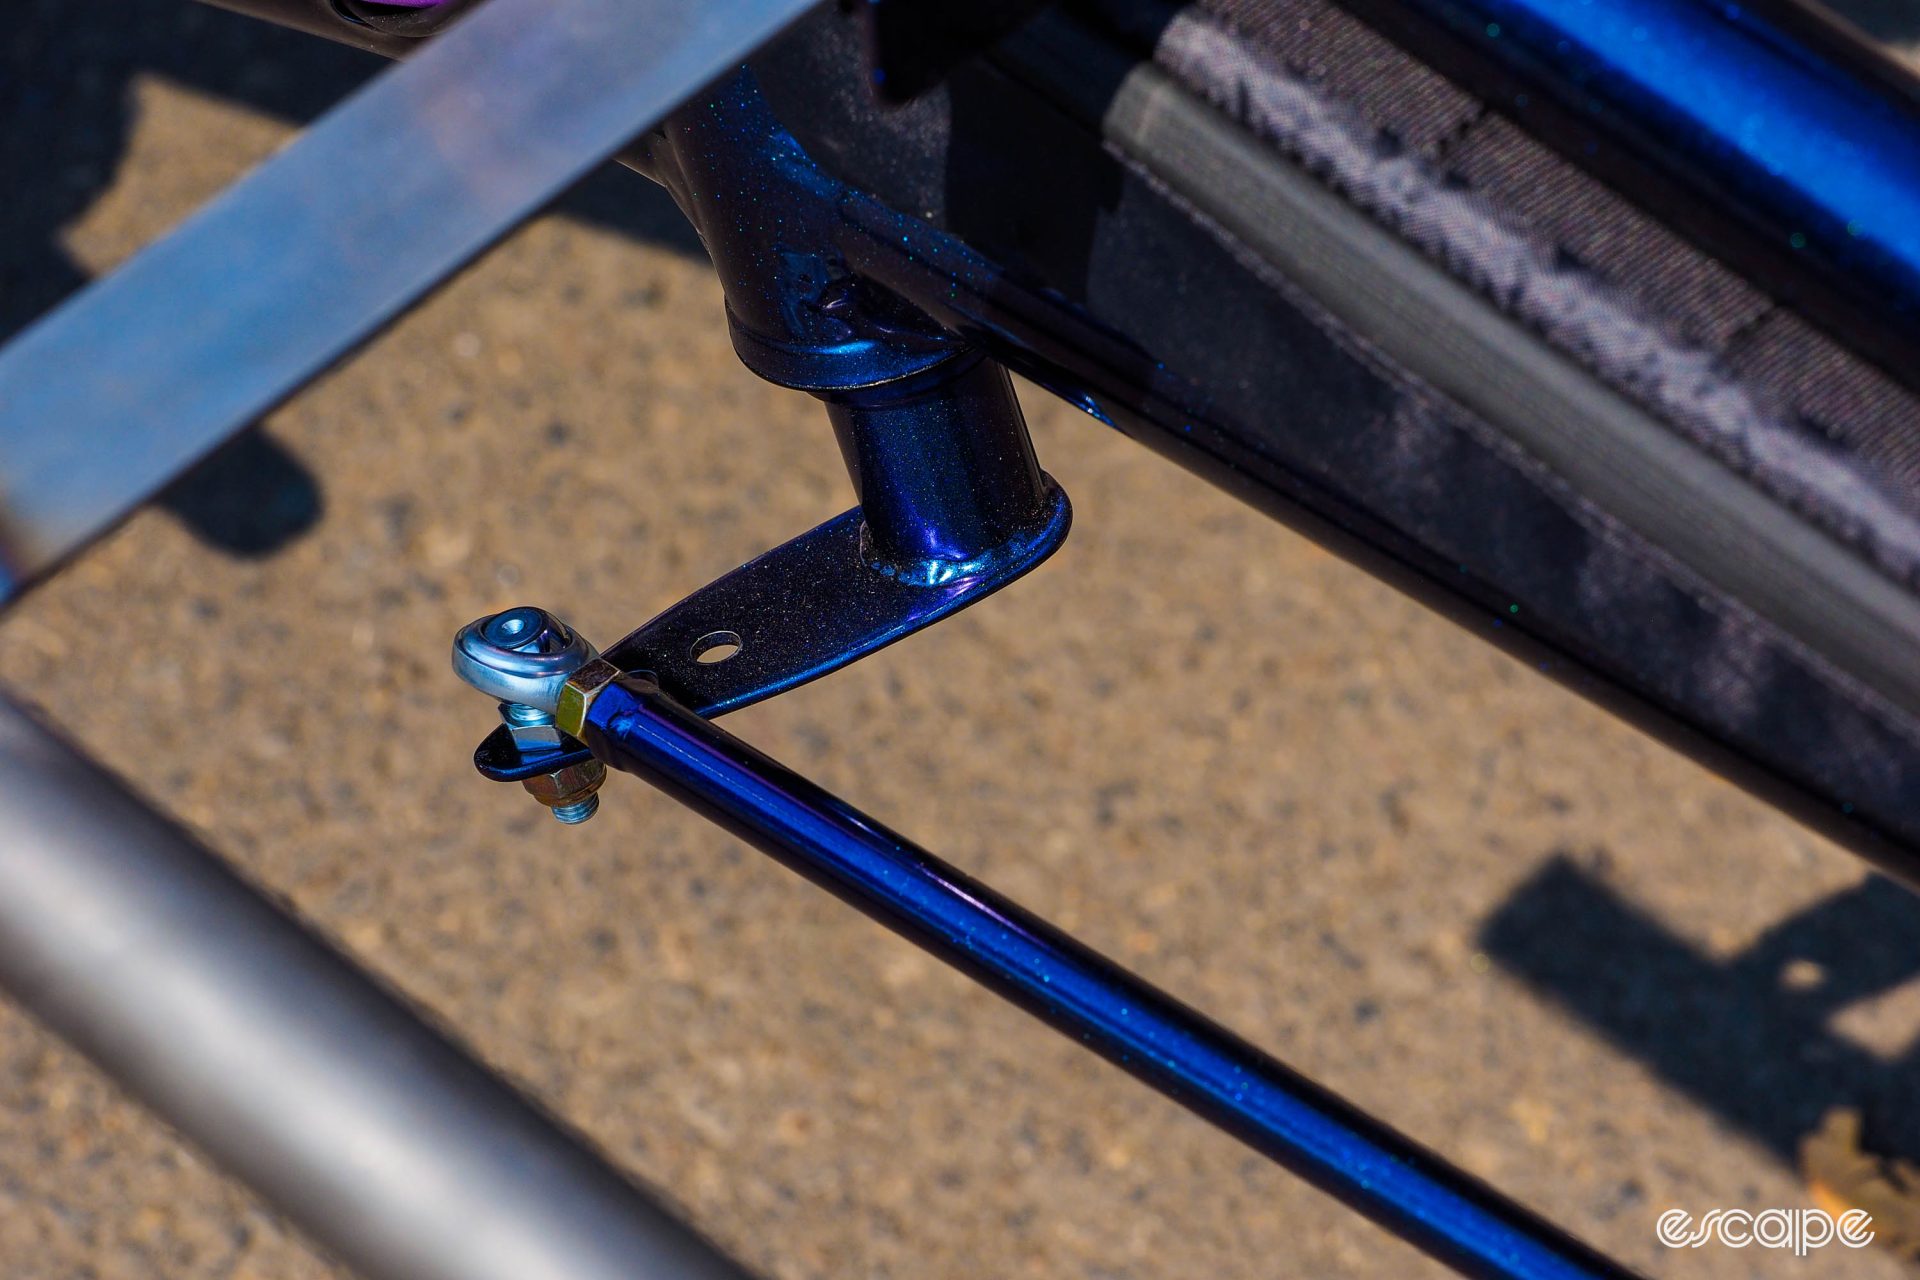 Matching blue linkage rod for the steering mechanism. 